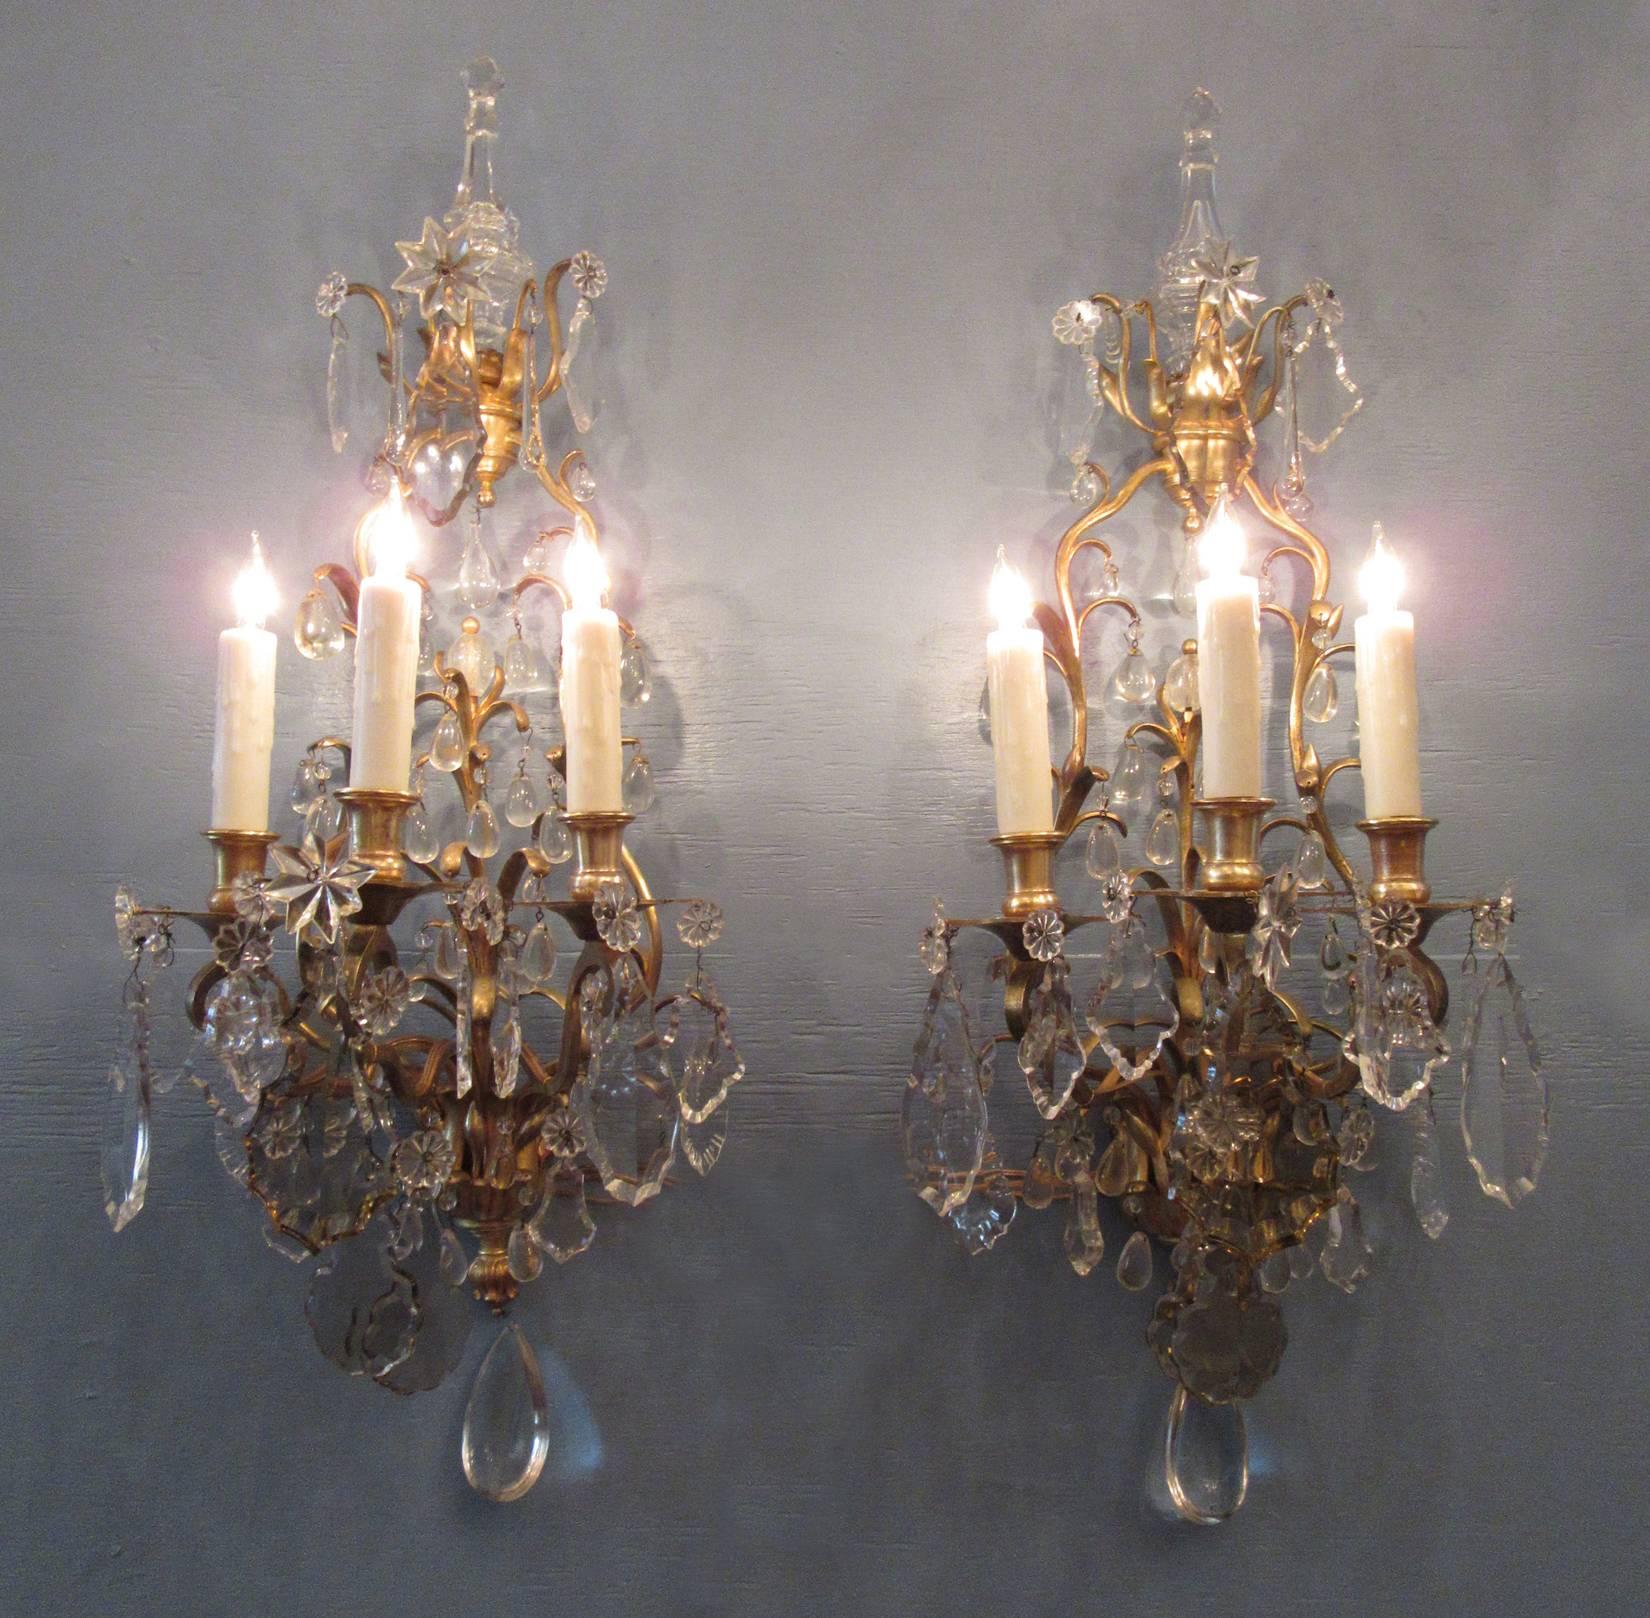 A large pair of 19th century French Louis XIV bronze doré and crystal sconces, circa 1830, each featuring three candle arms and large clear and smokey cut and polished crystal pendants. The pair have recently been cleaned and rewired with new